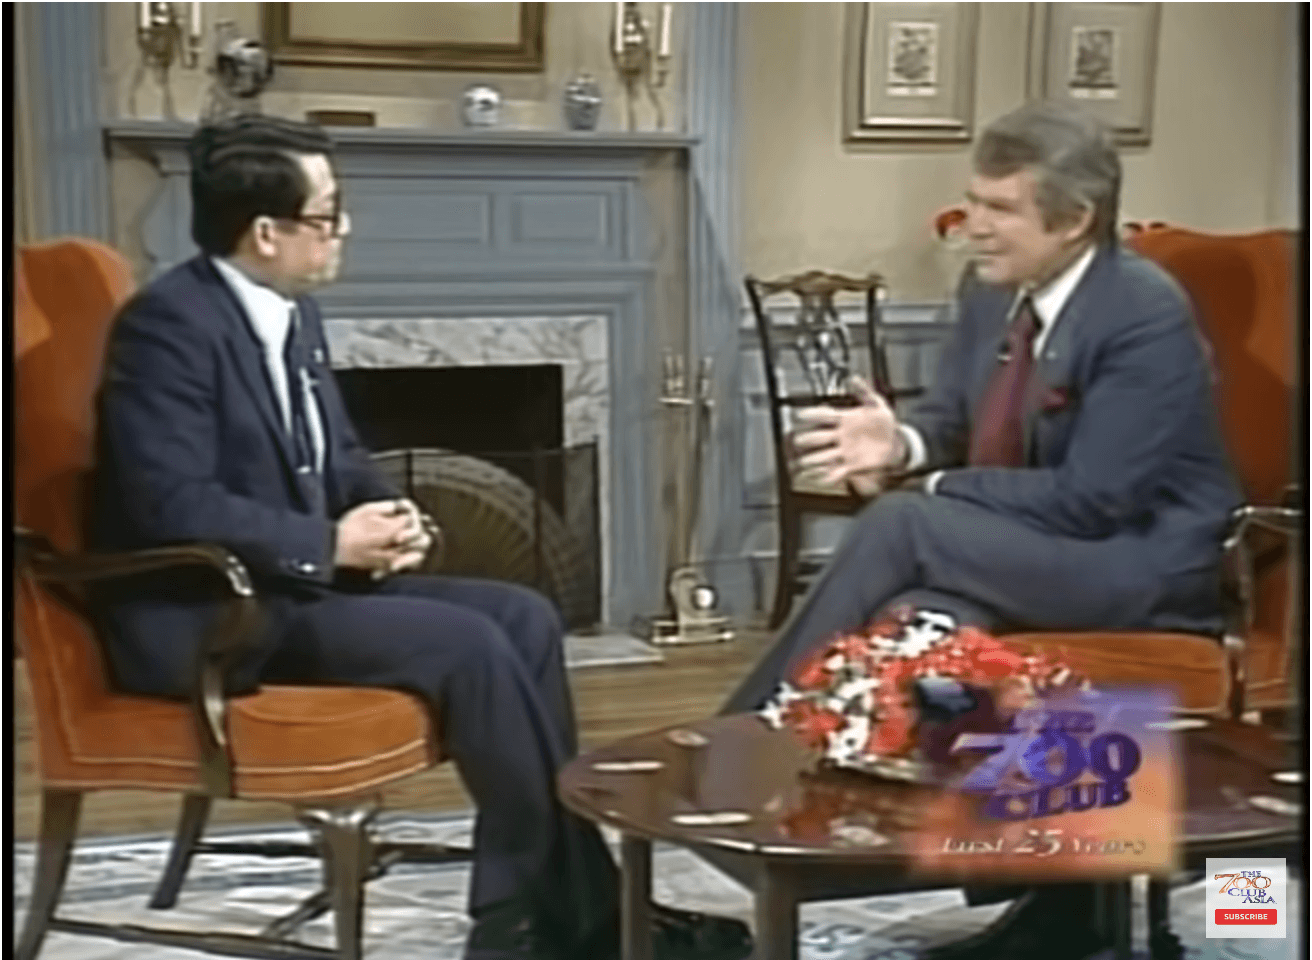 ‘Is there really a God?’: Even Ninoy Aquino opened up to Pat Robertson